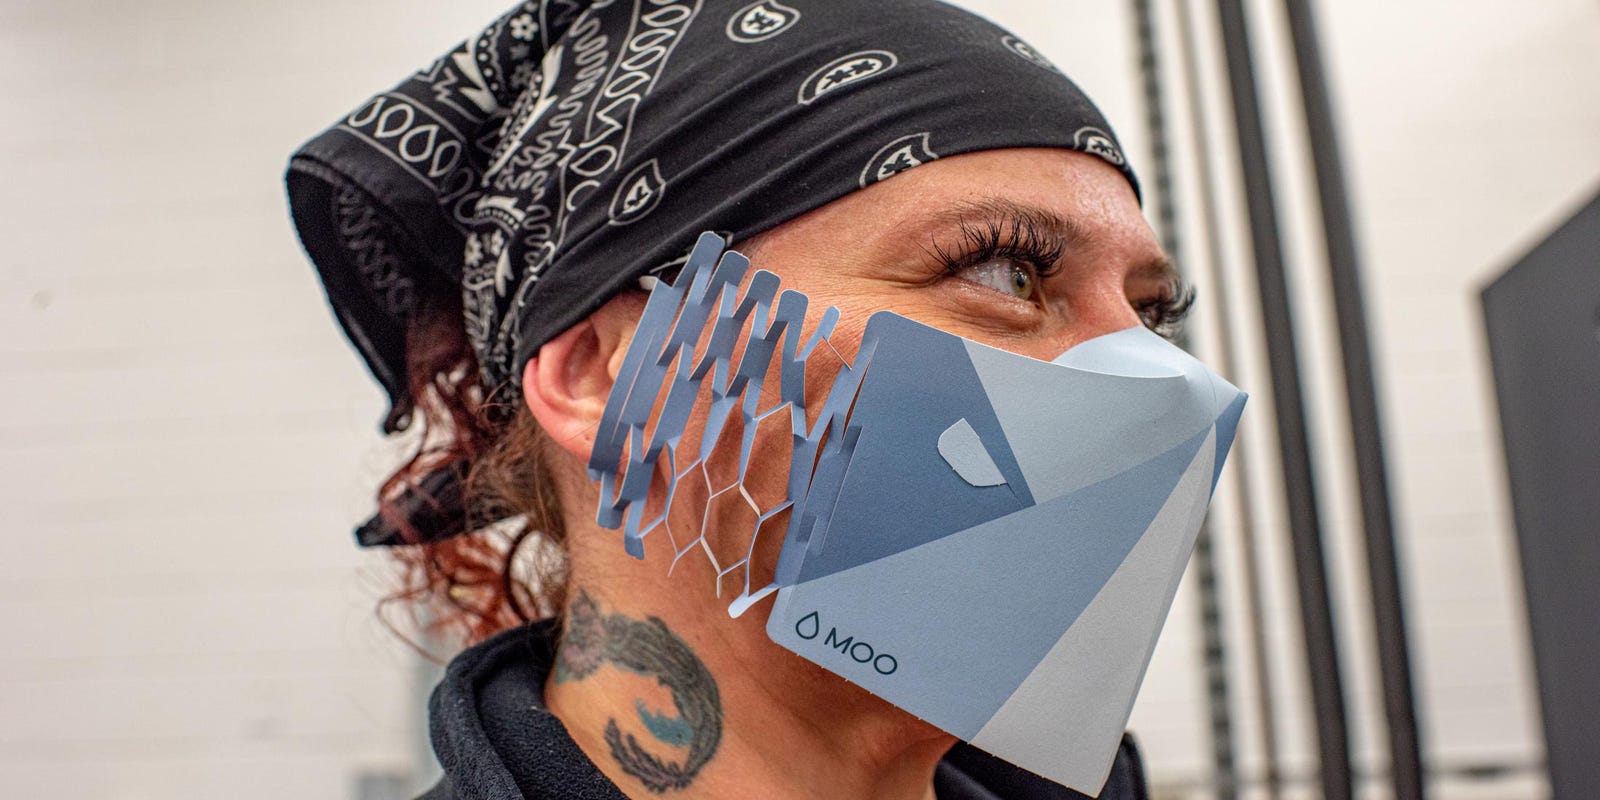 Saving Face And More Lincoln S Moo Produces Recyclable Paper Masks Which Can Be Customized With Logos